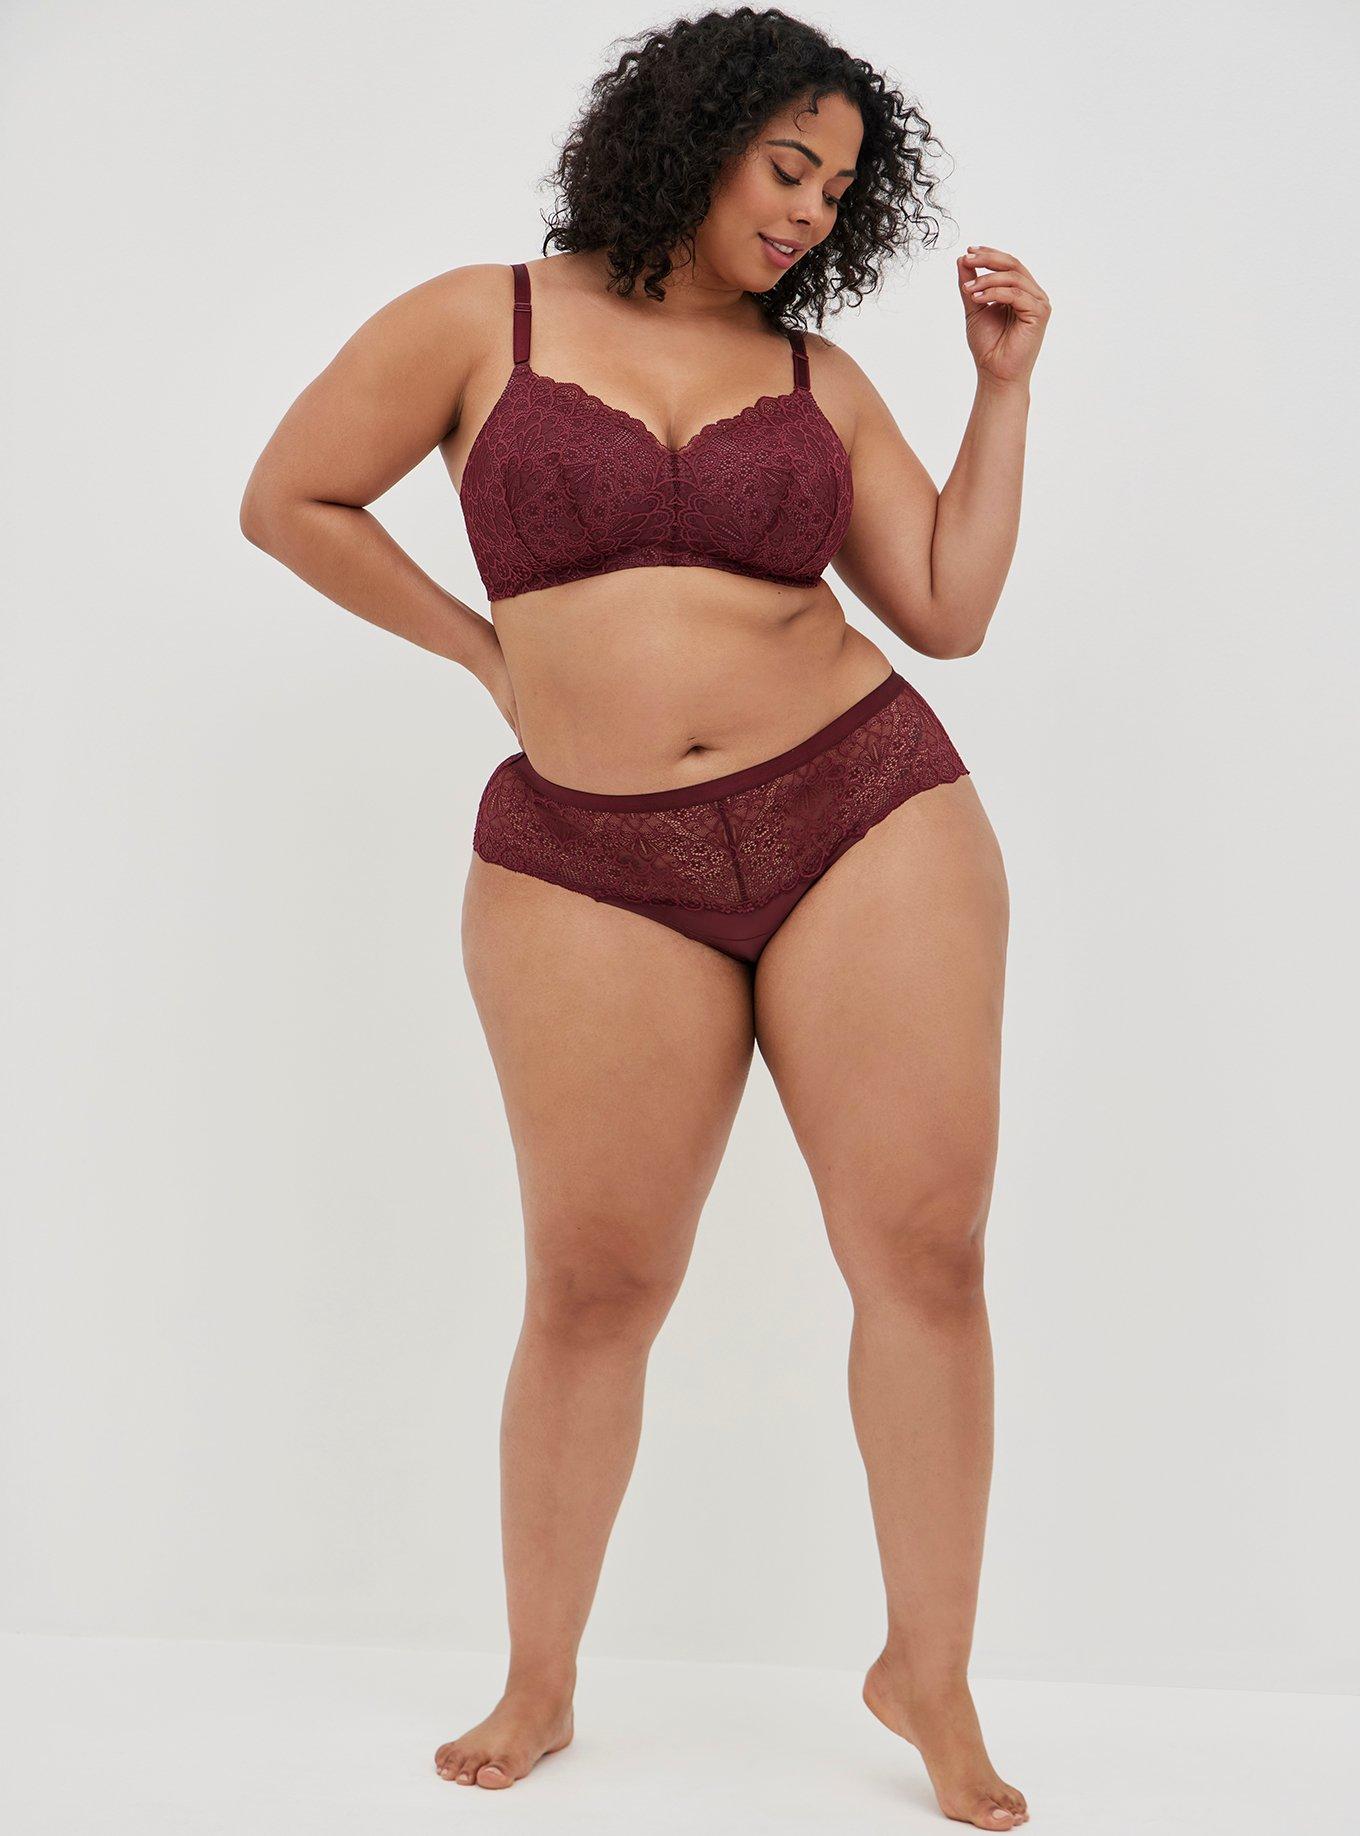 Torrid Sexy Lipstick Red Lace Bralette & Caged Panty SET Plus Size